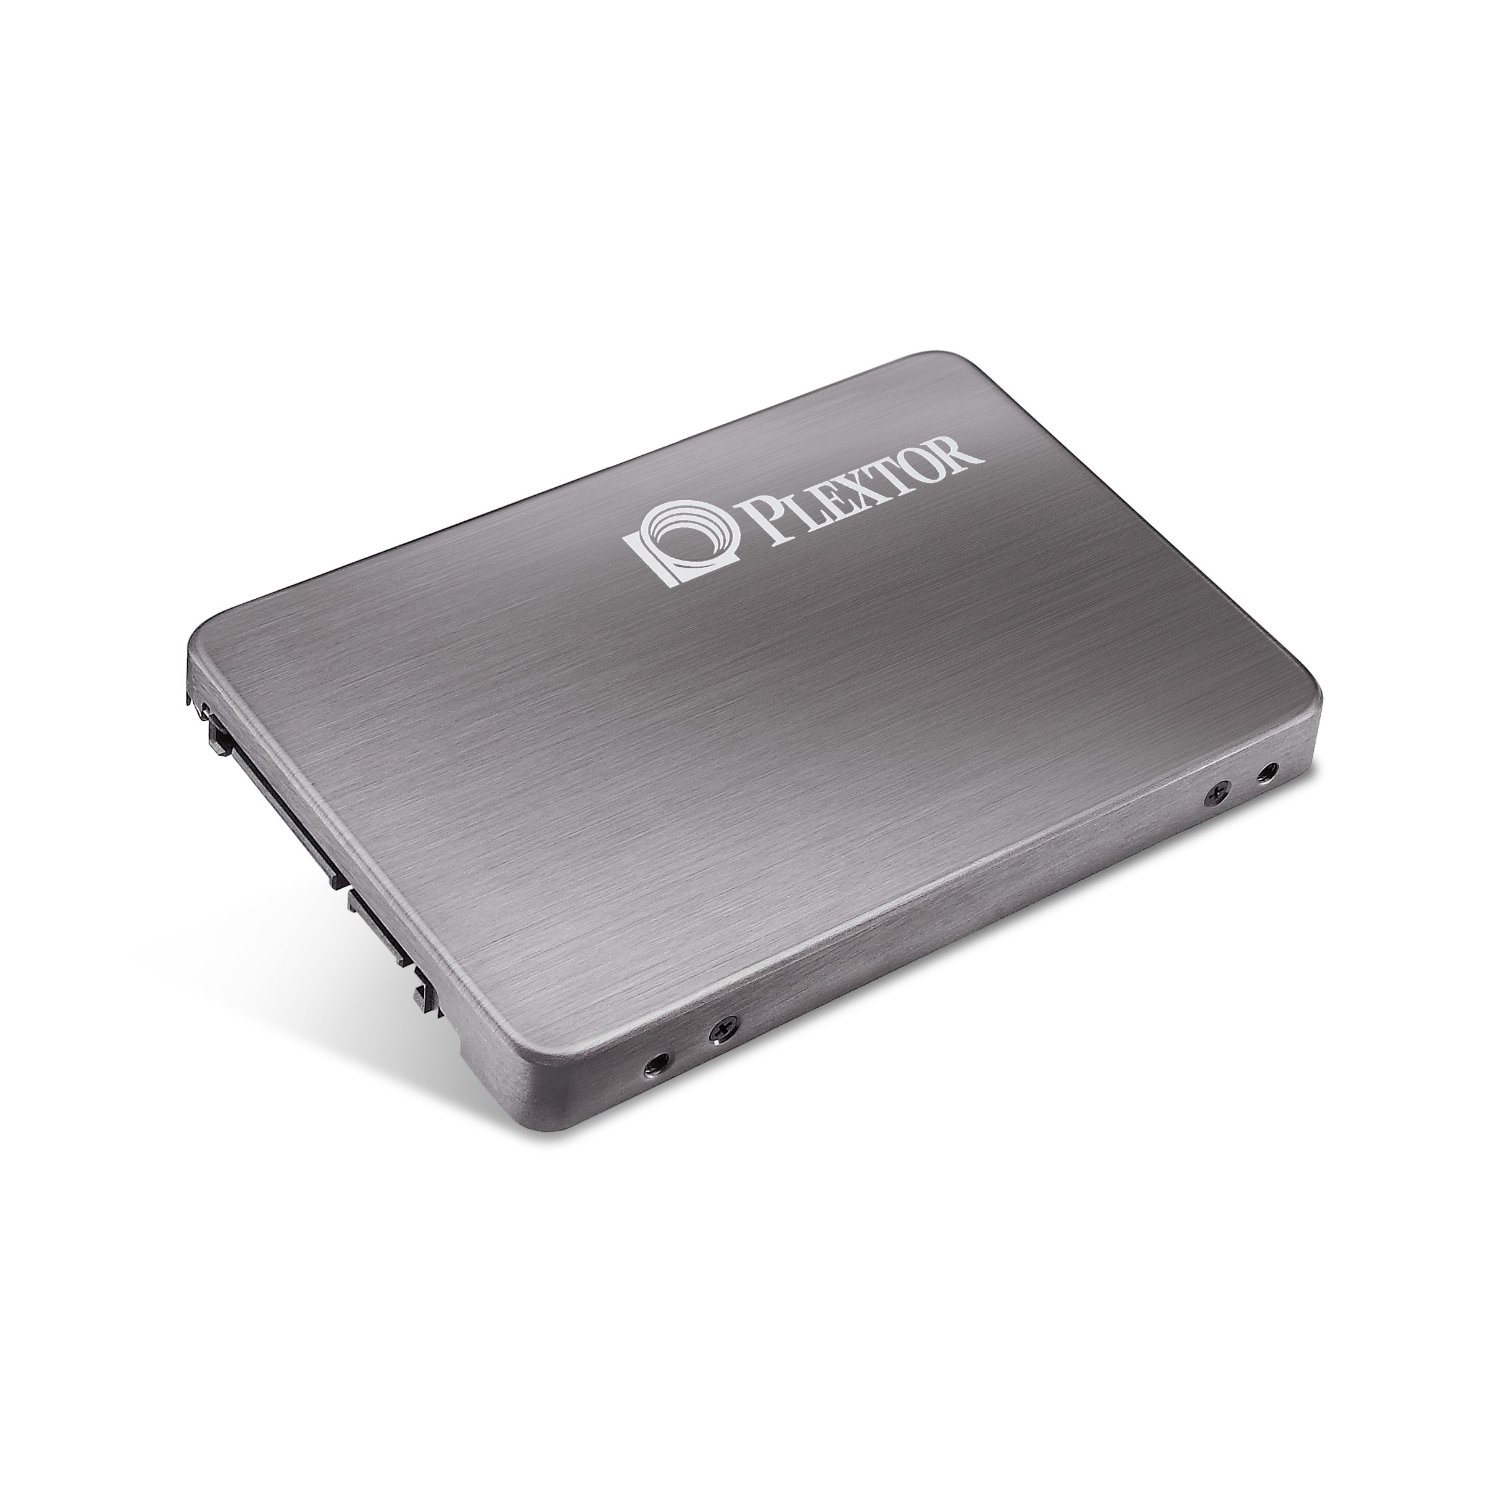 PX-64M3 Solid State Drive